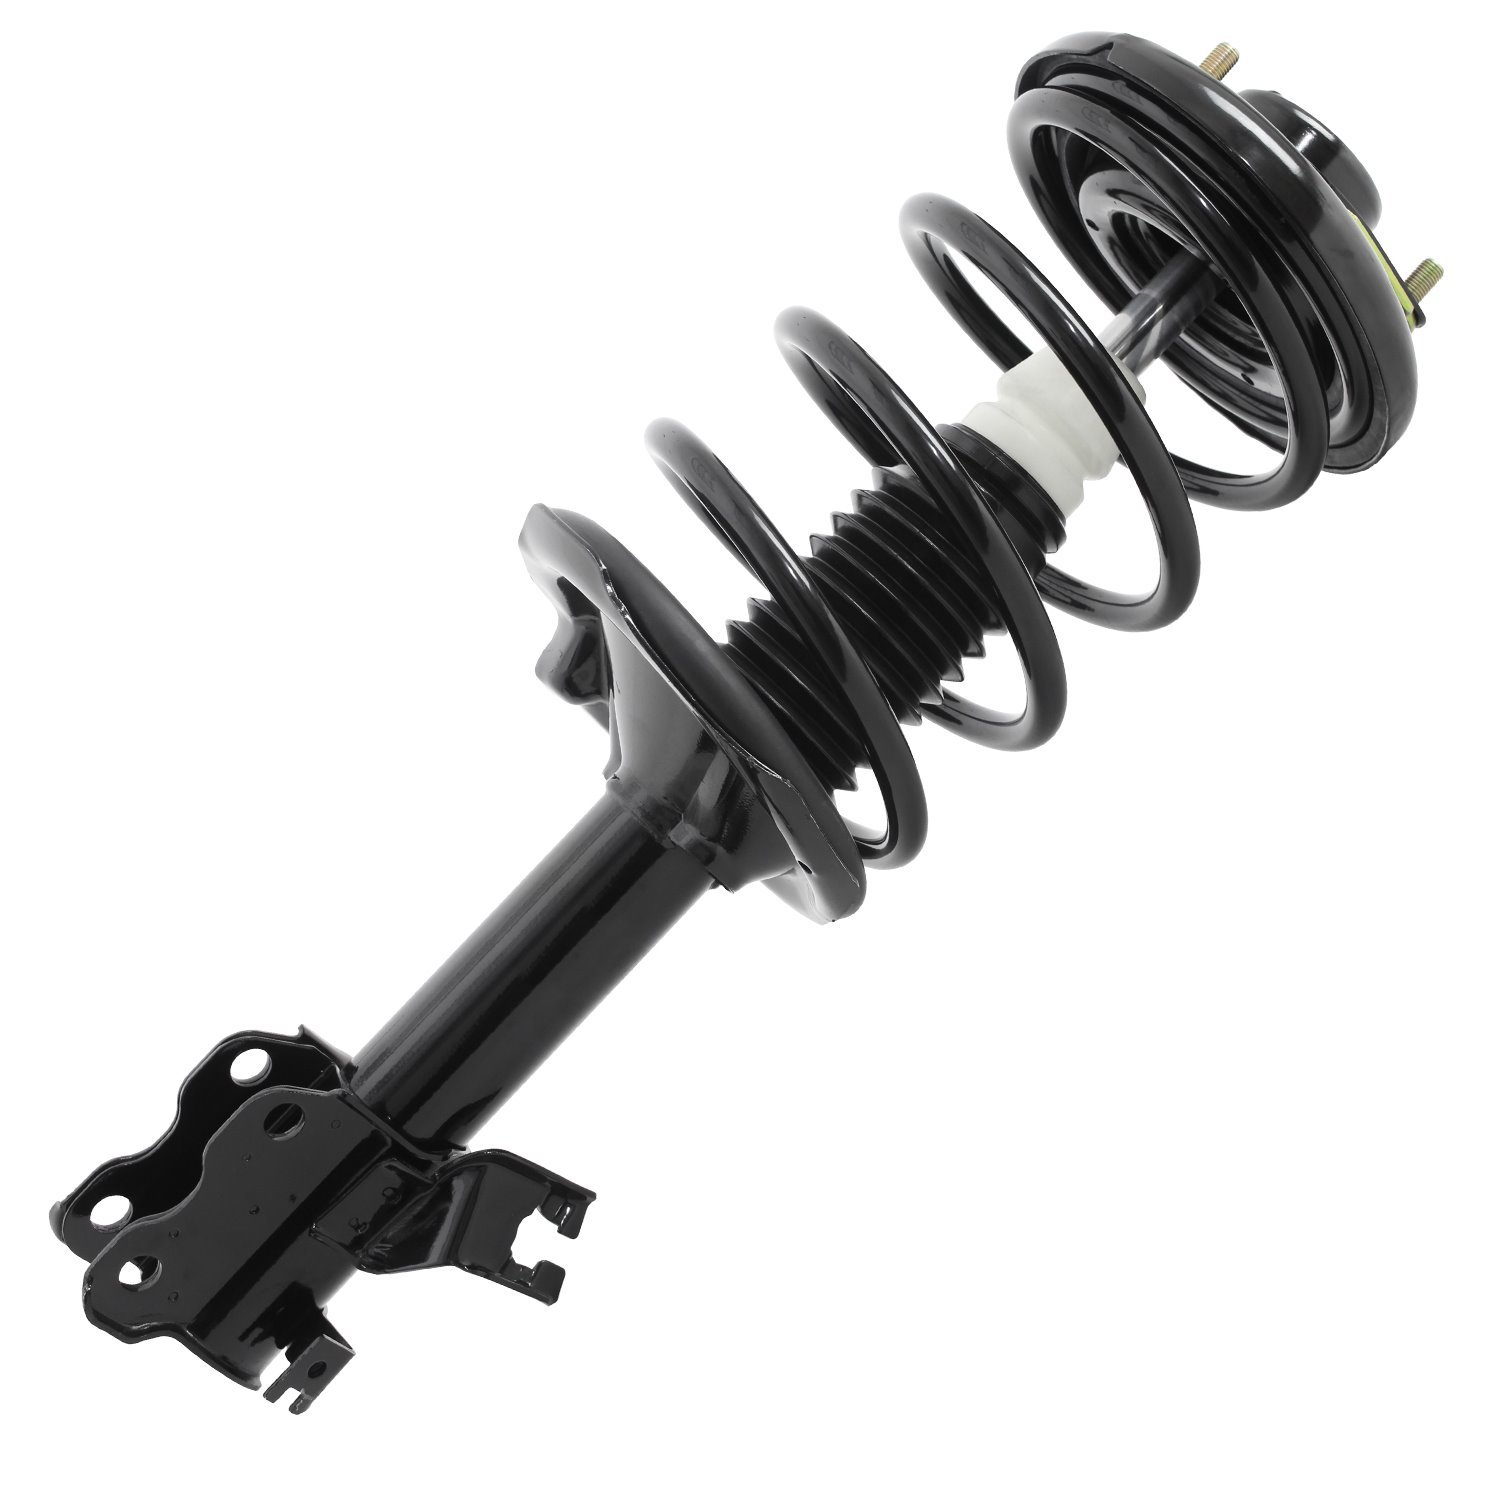 11942 Suspension Strut & Coil Spring Assembly Fits Select Nissan Maxima, Infiniti I30